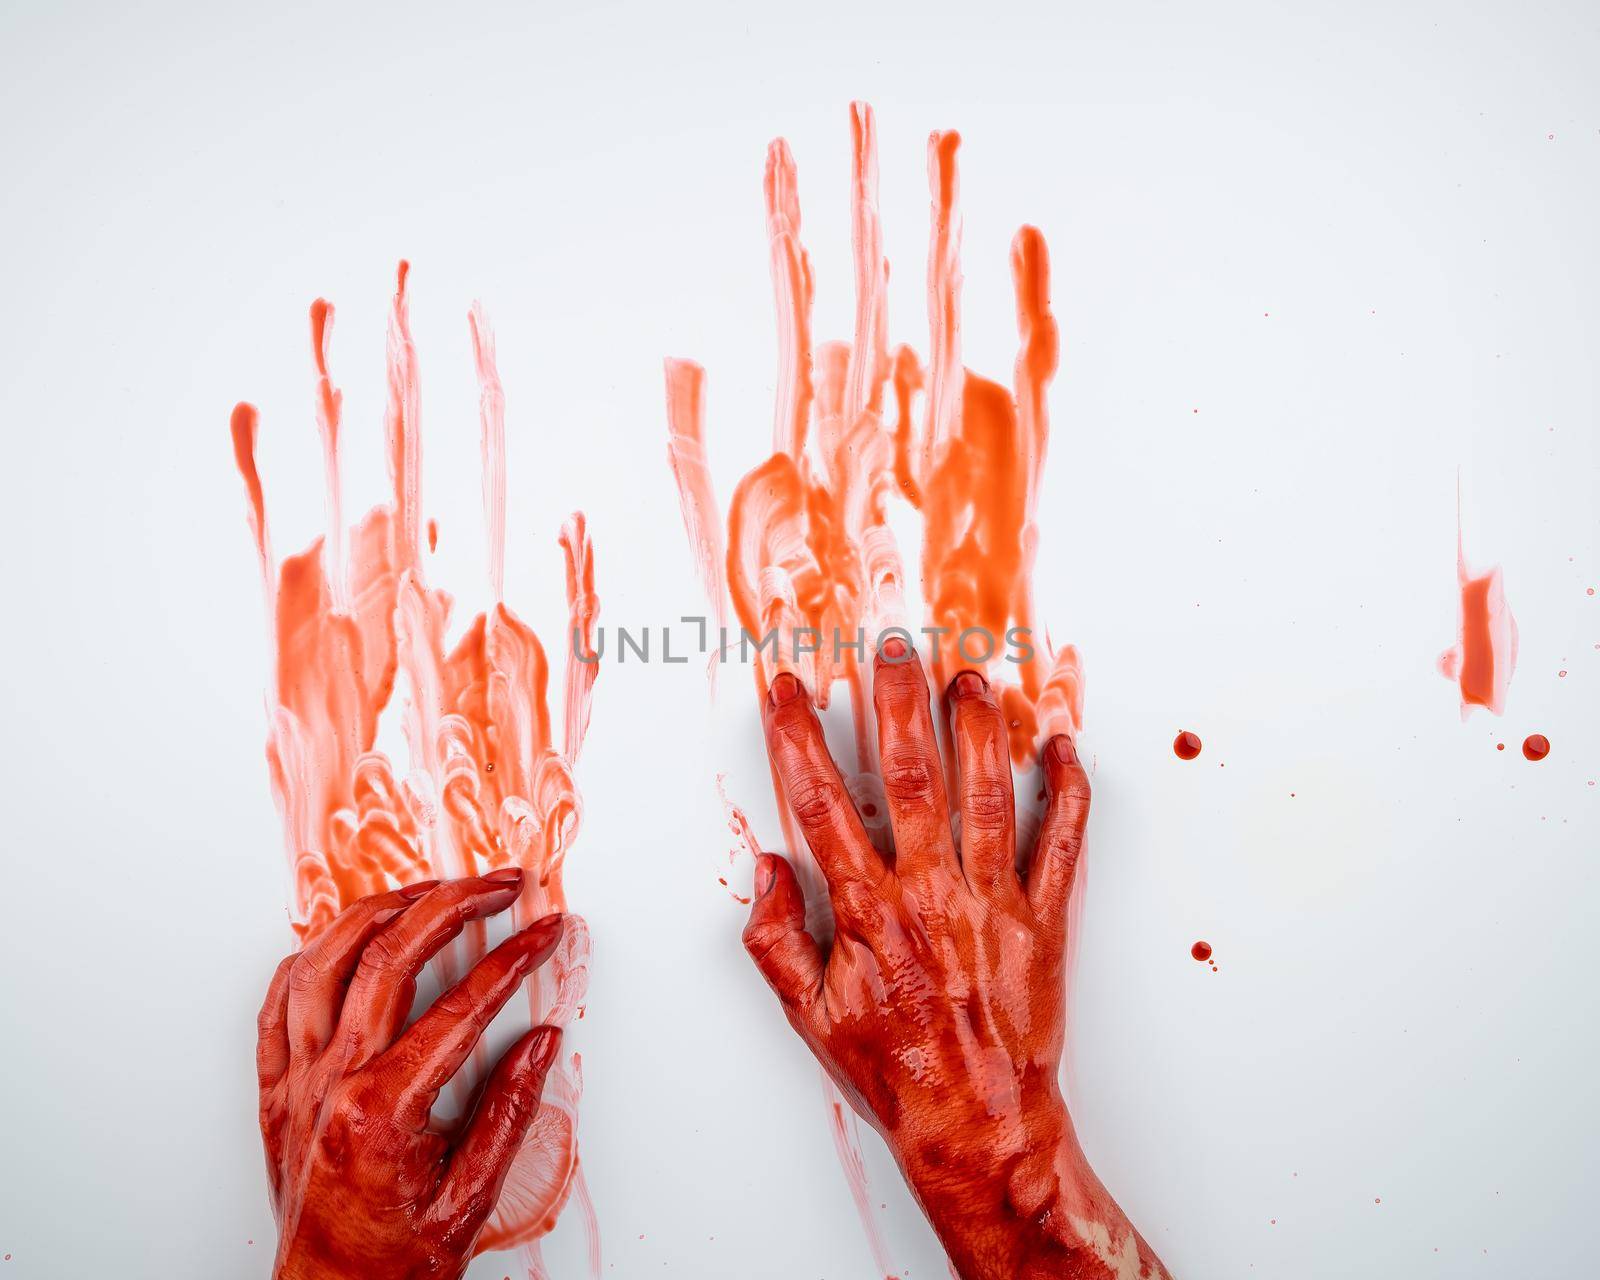 Female hands in blood on a white background